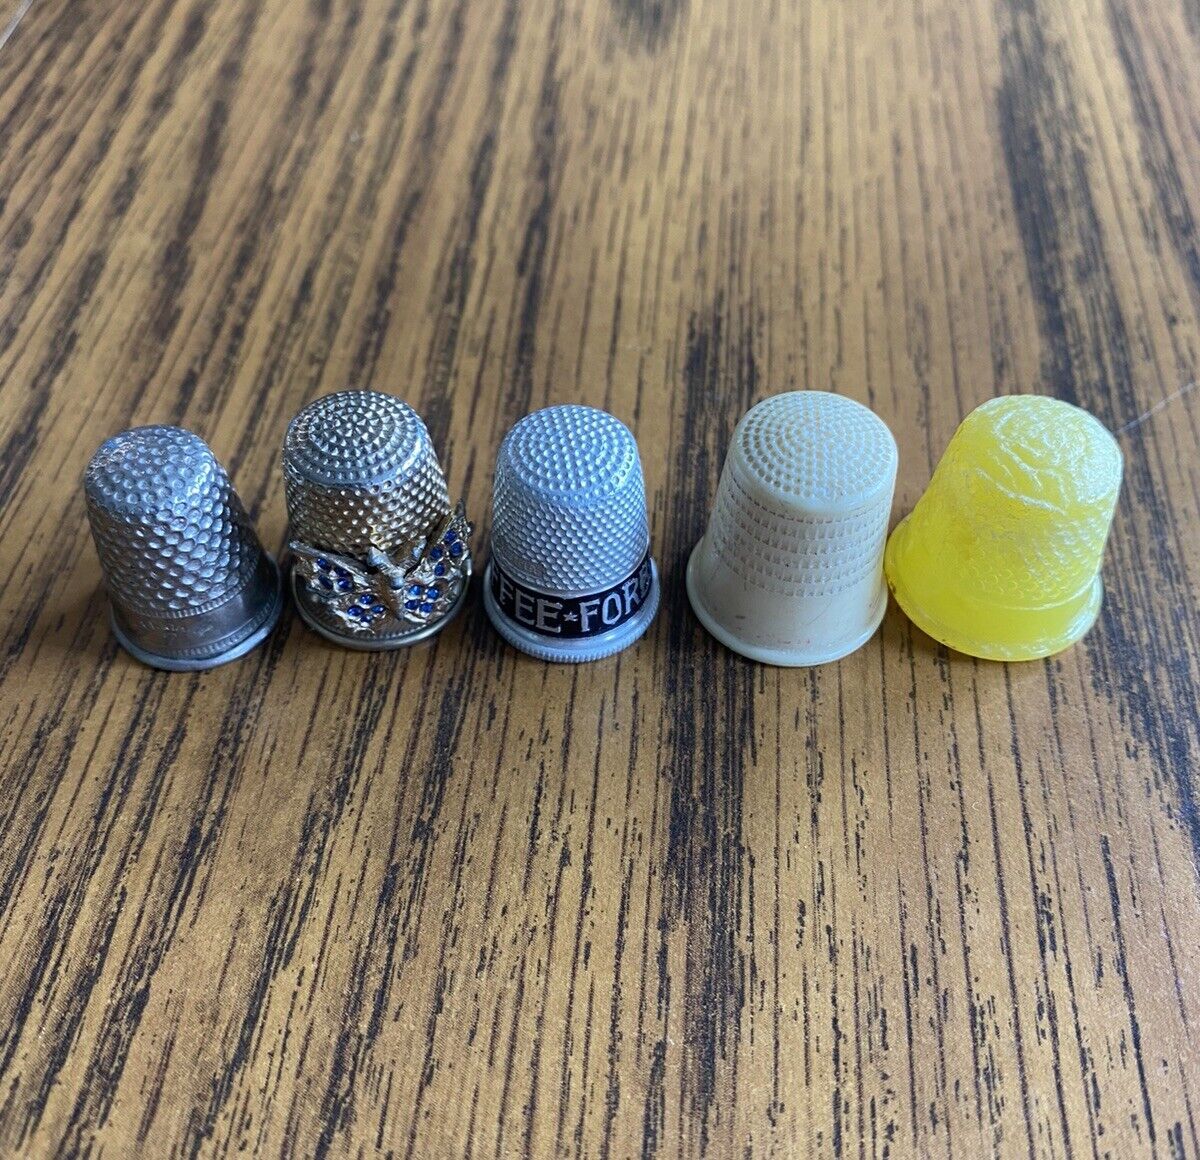 Vintage Lot of Decorative Ornate and Metal Sewing Thimbles Lot of 5